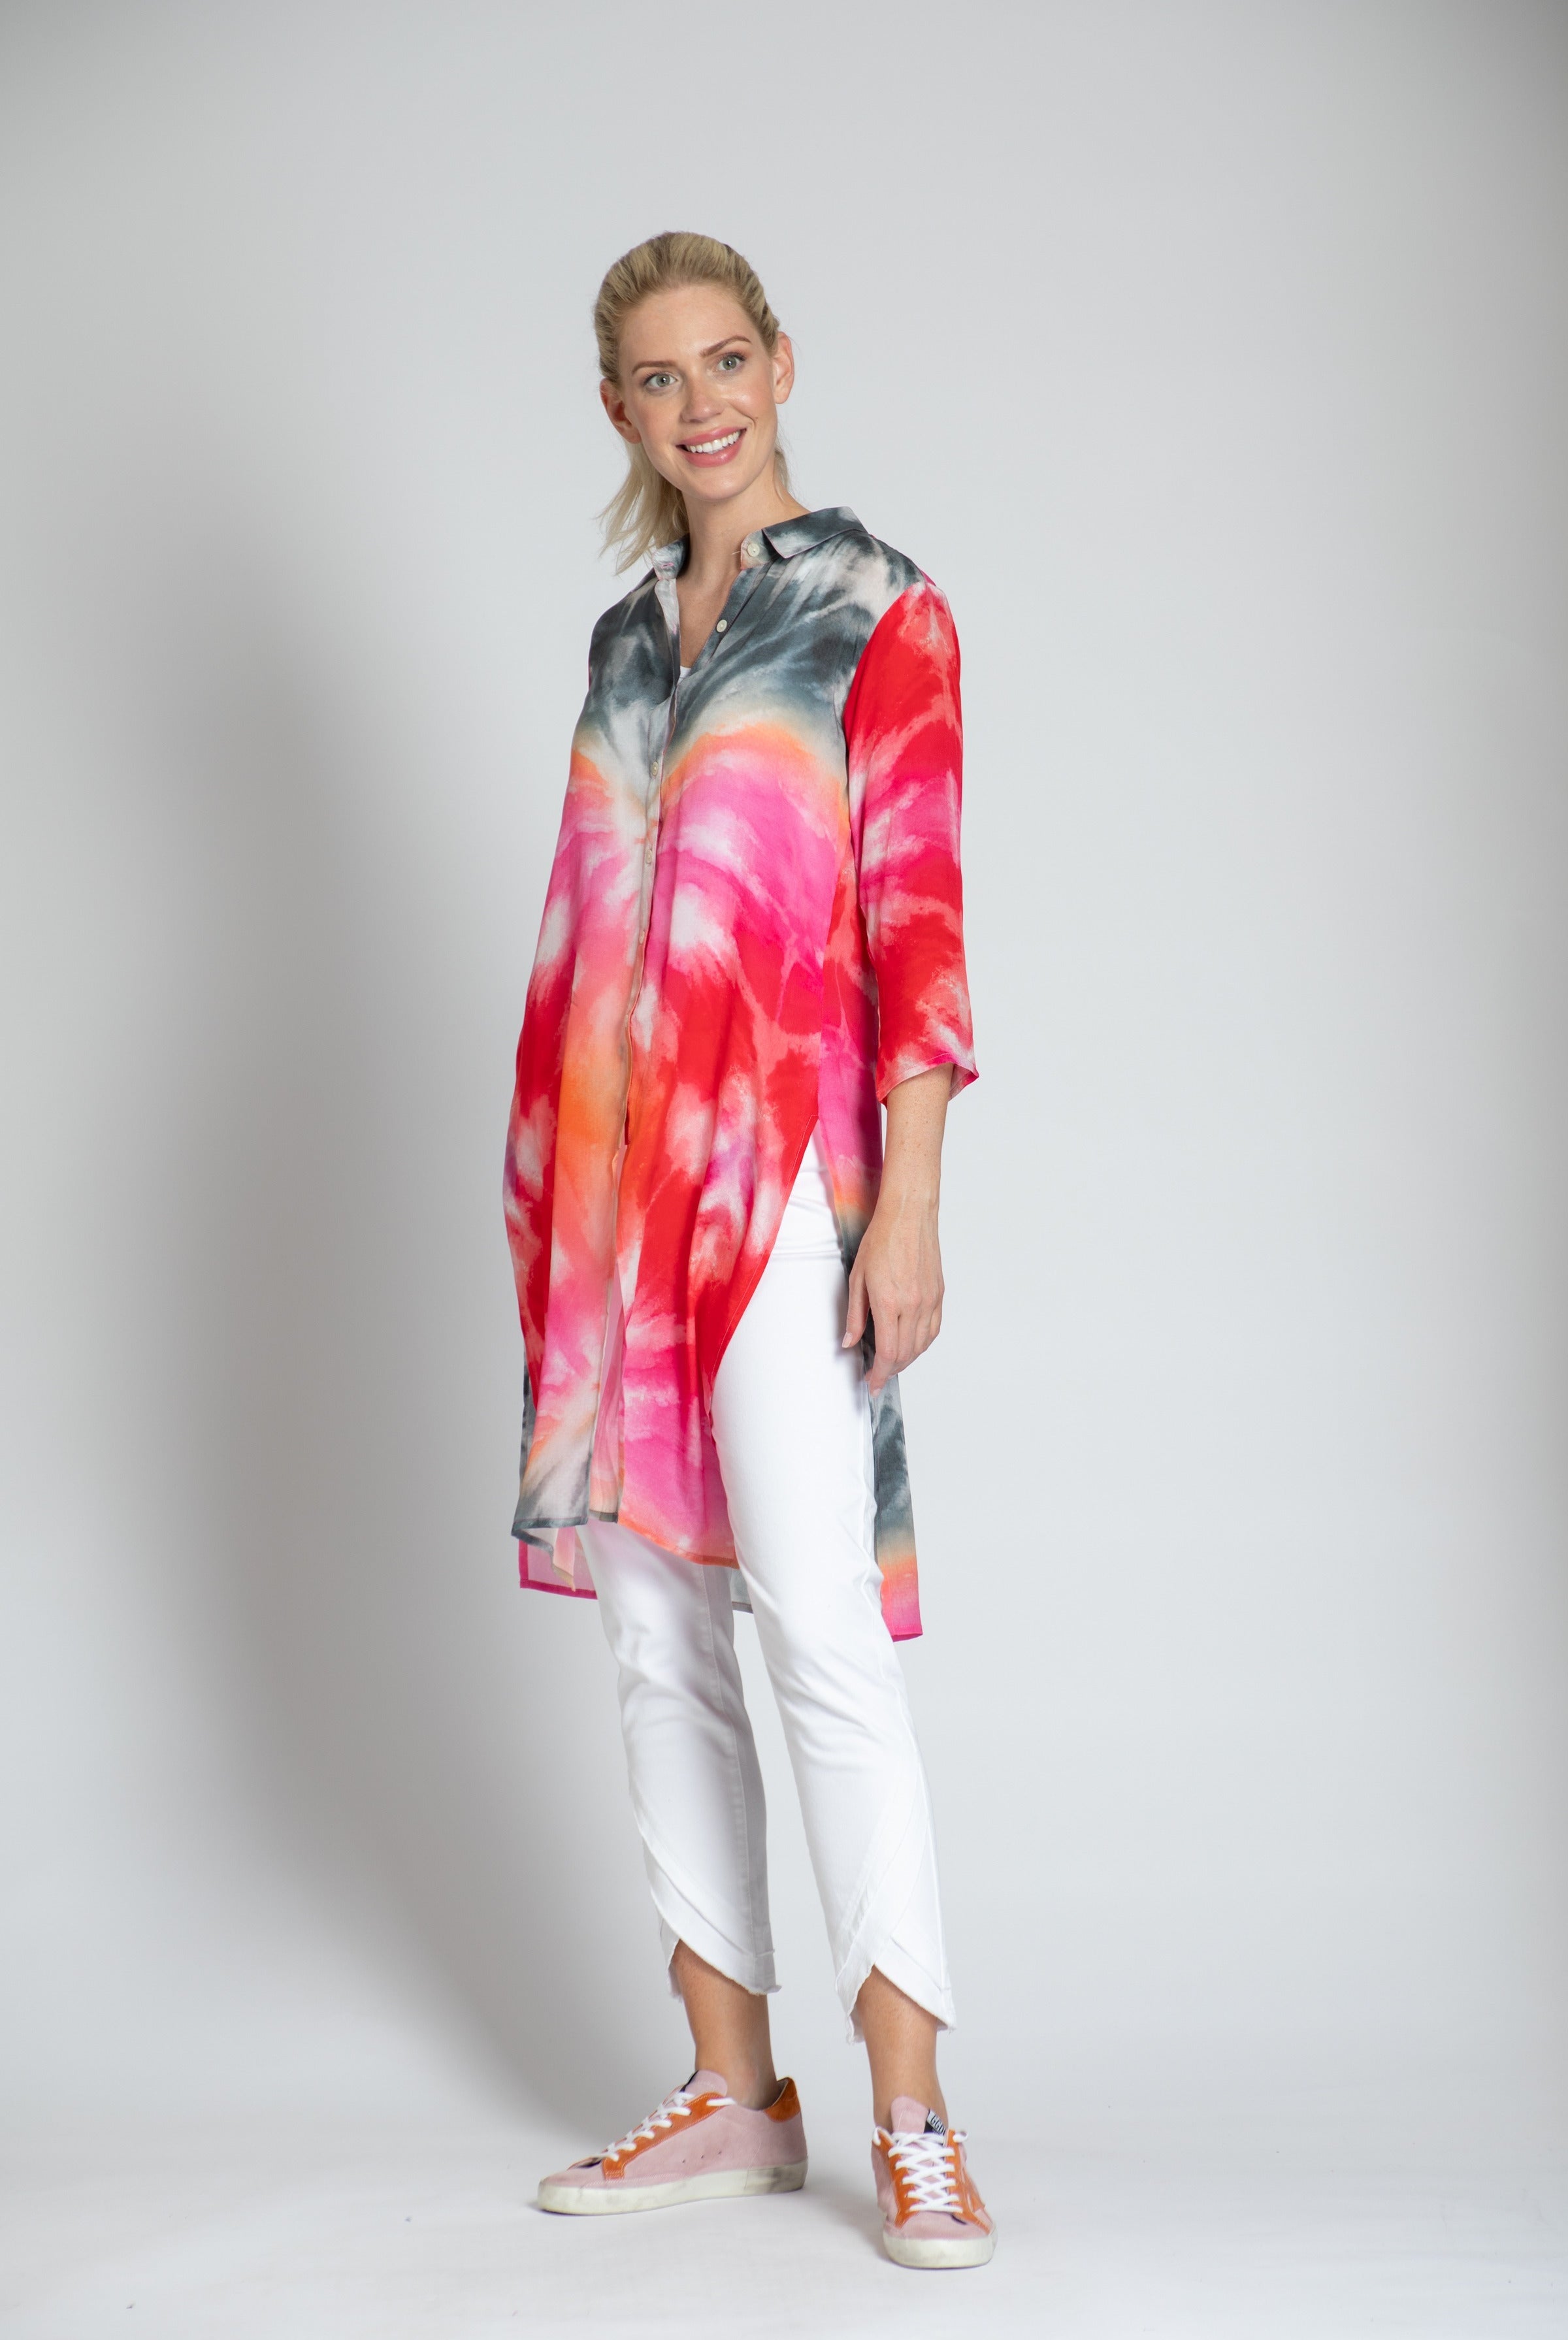 Abstract Tie Dye Print - 3⁄4 Sleeve Button-up With Side Slits